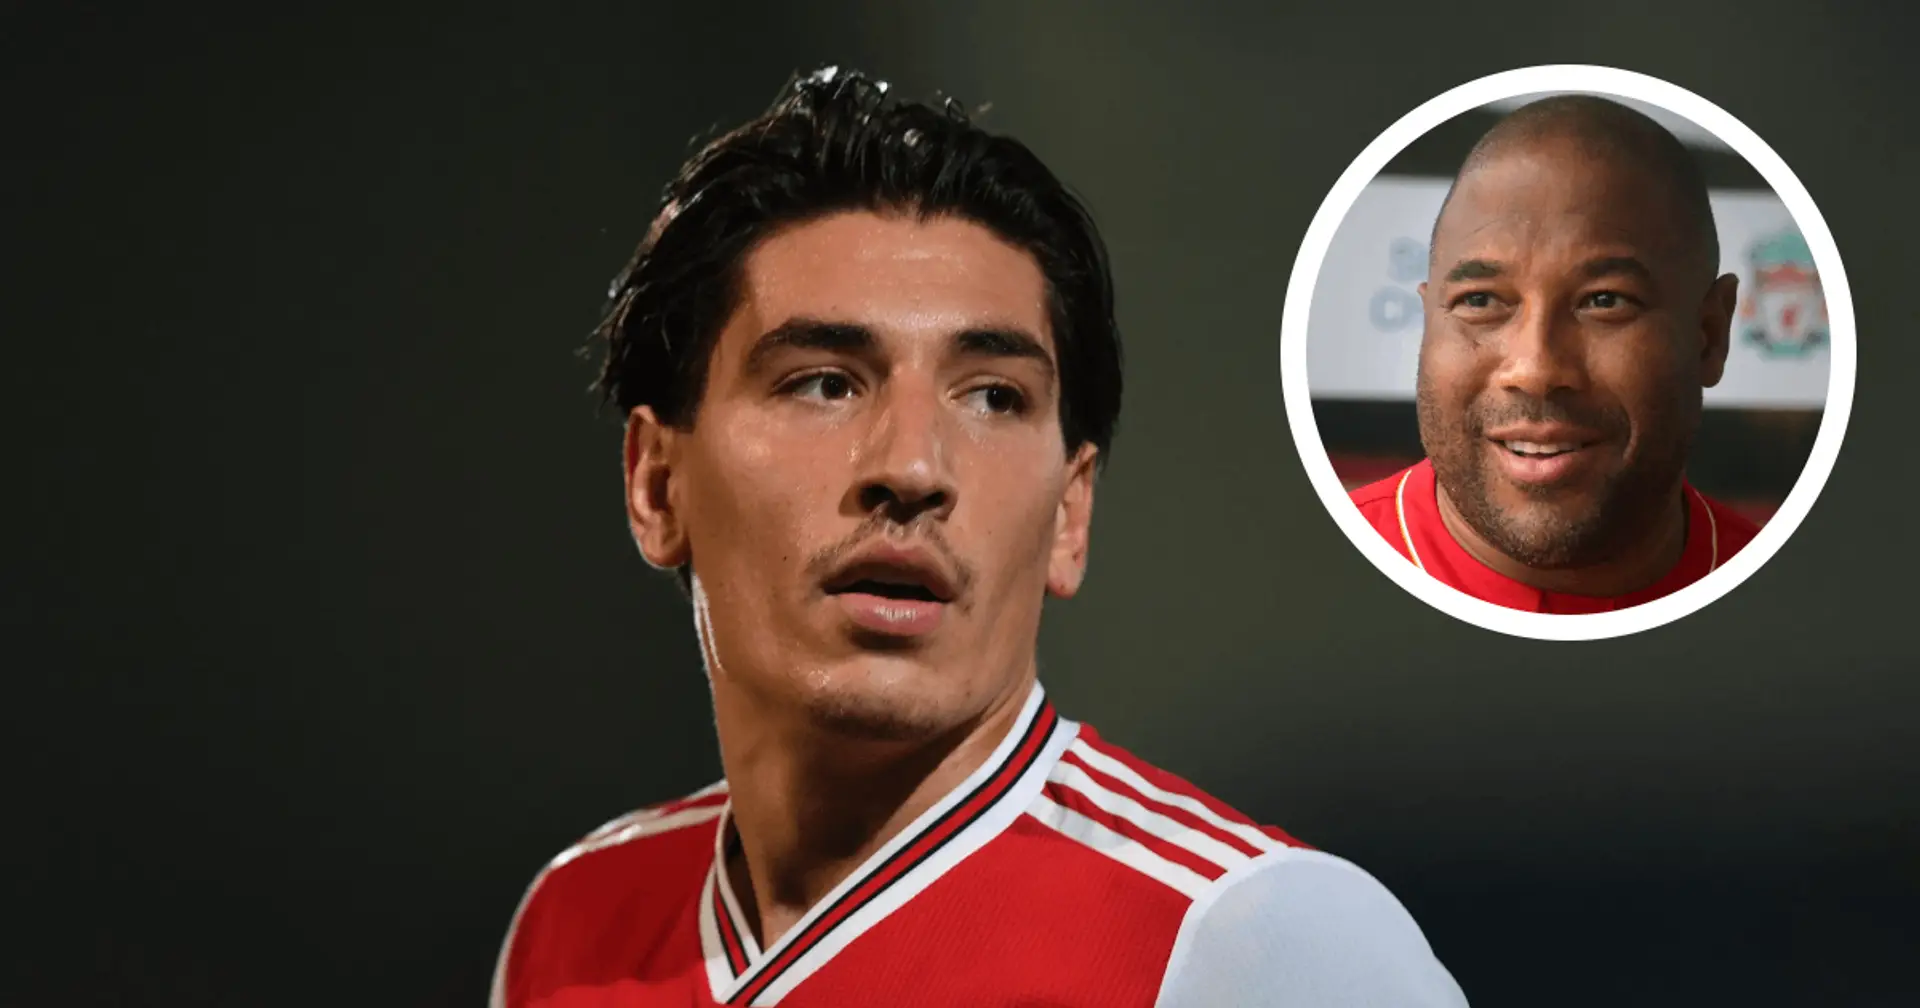 'I wouldn’t want a player like Bellerin at my club': Liverpool legend John Barnes